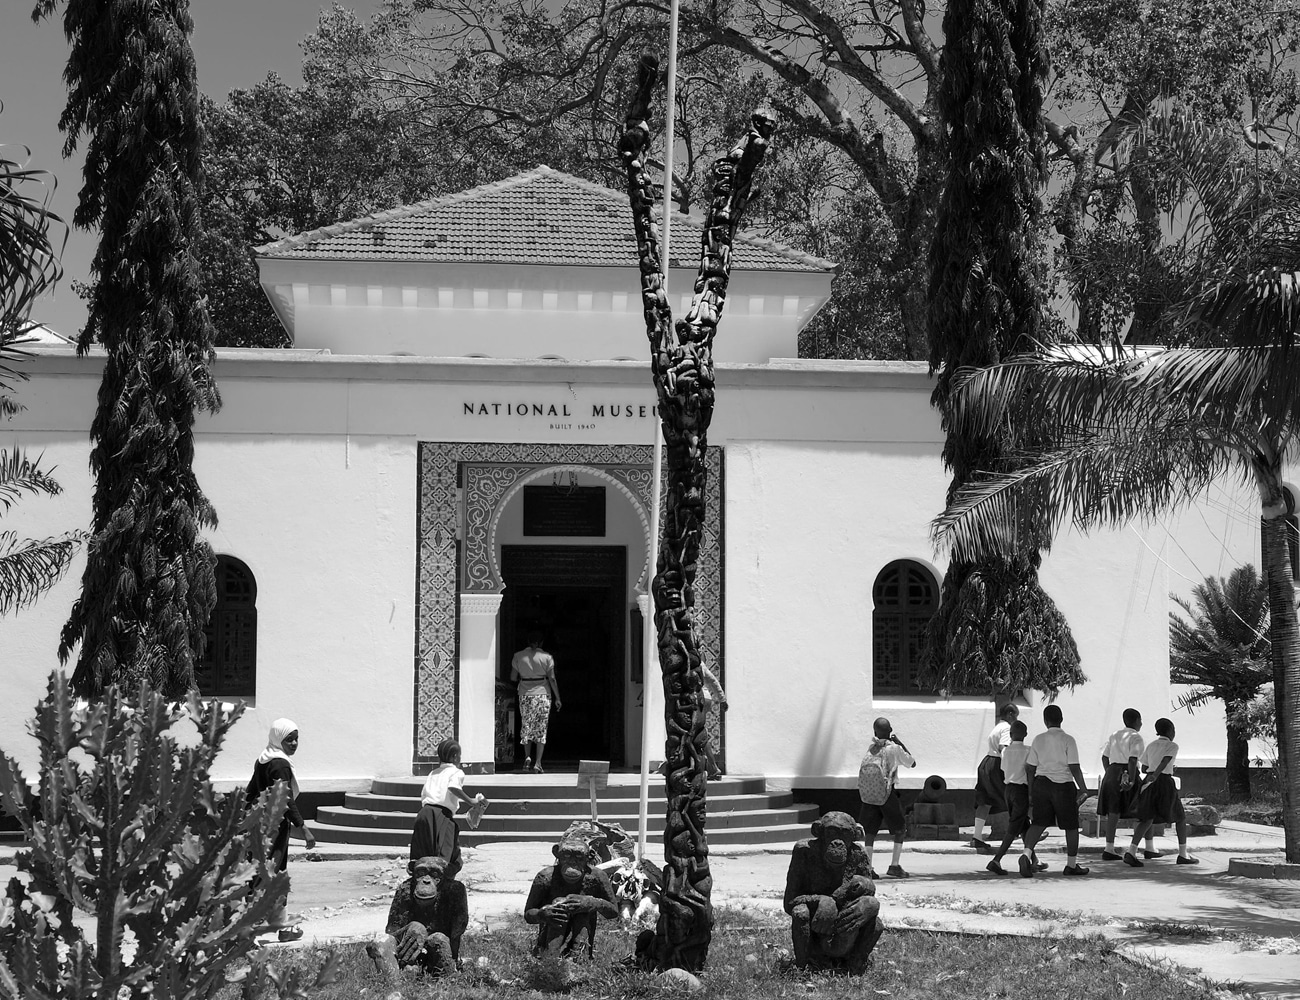 A View of The National Musuem of Tanzania